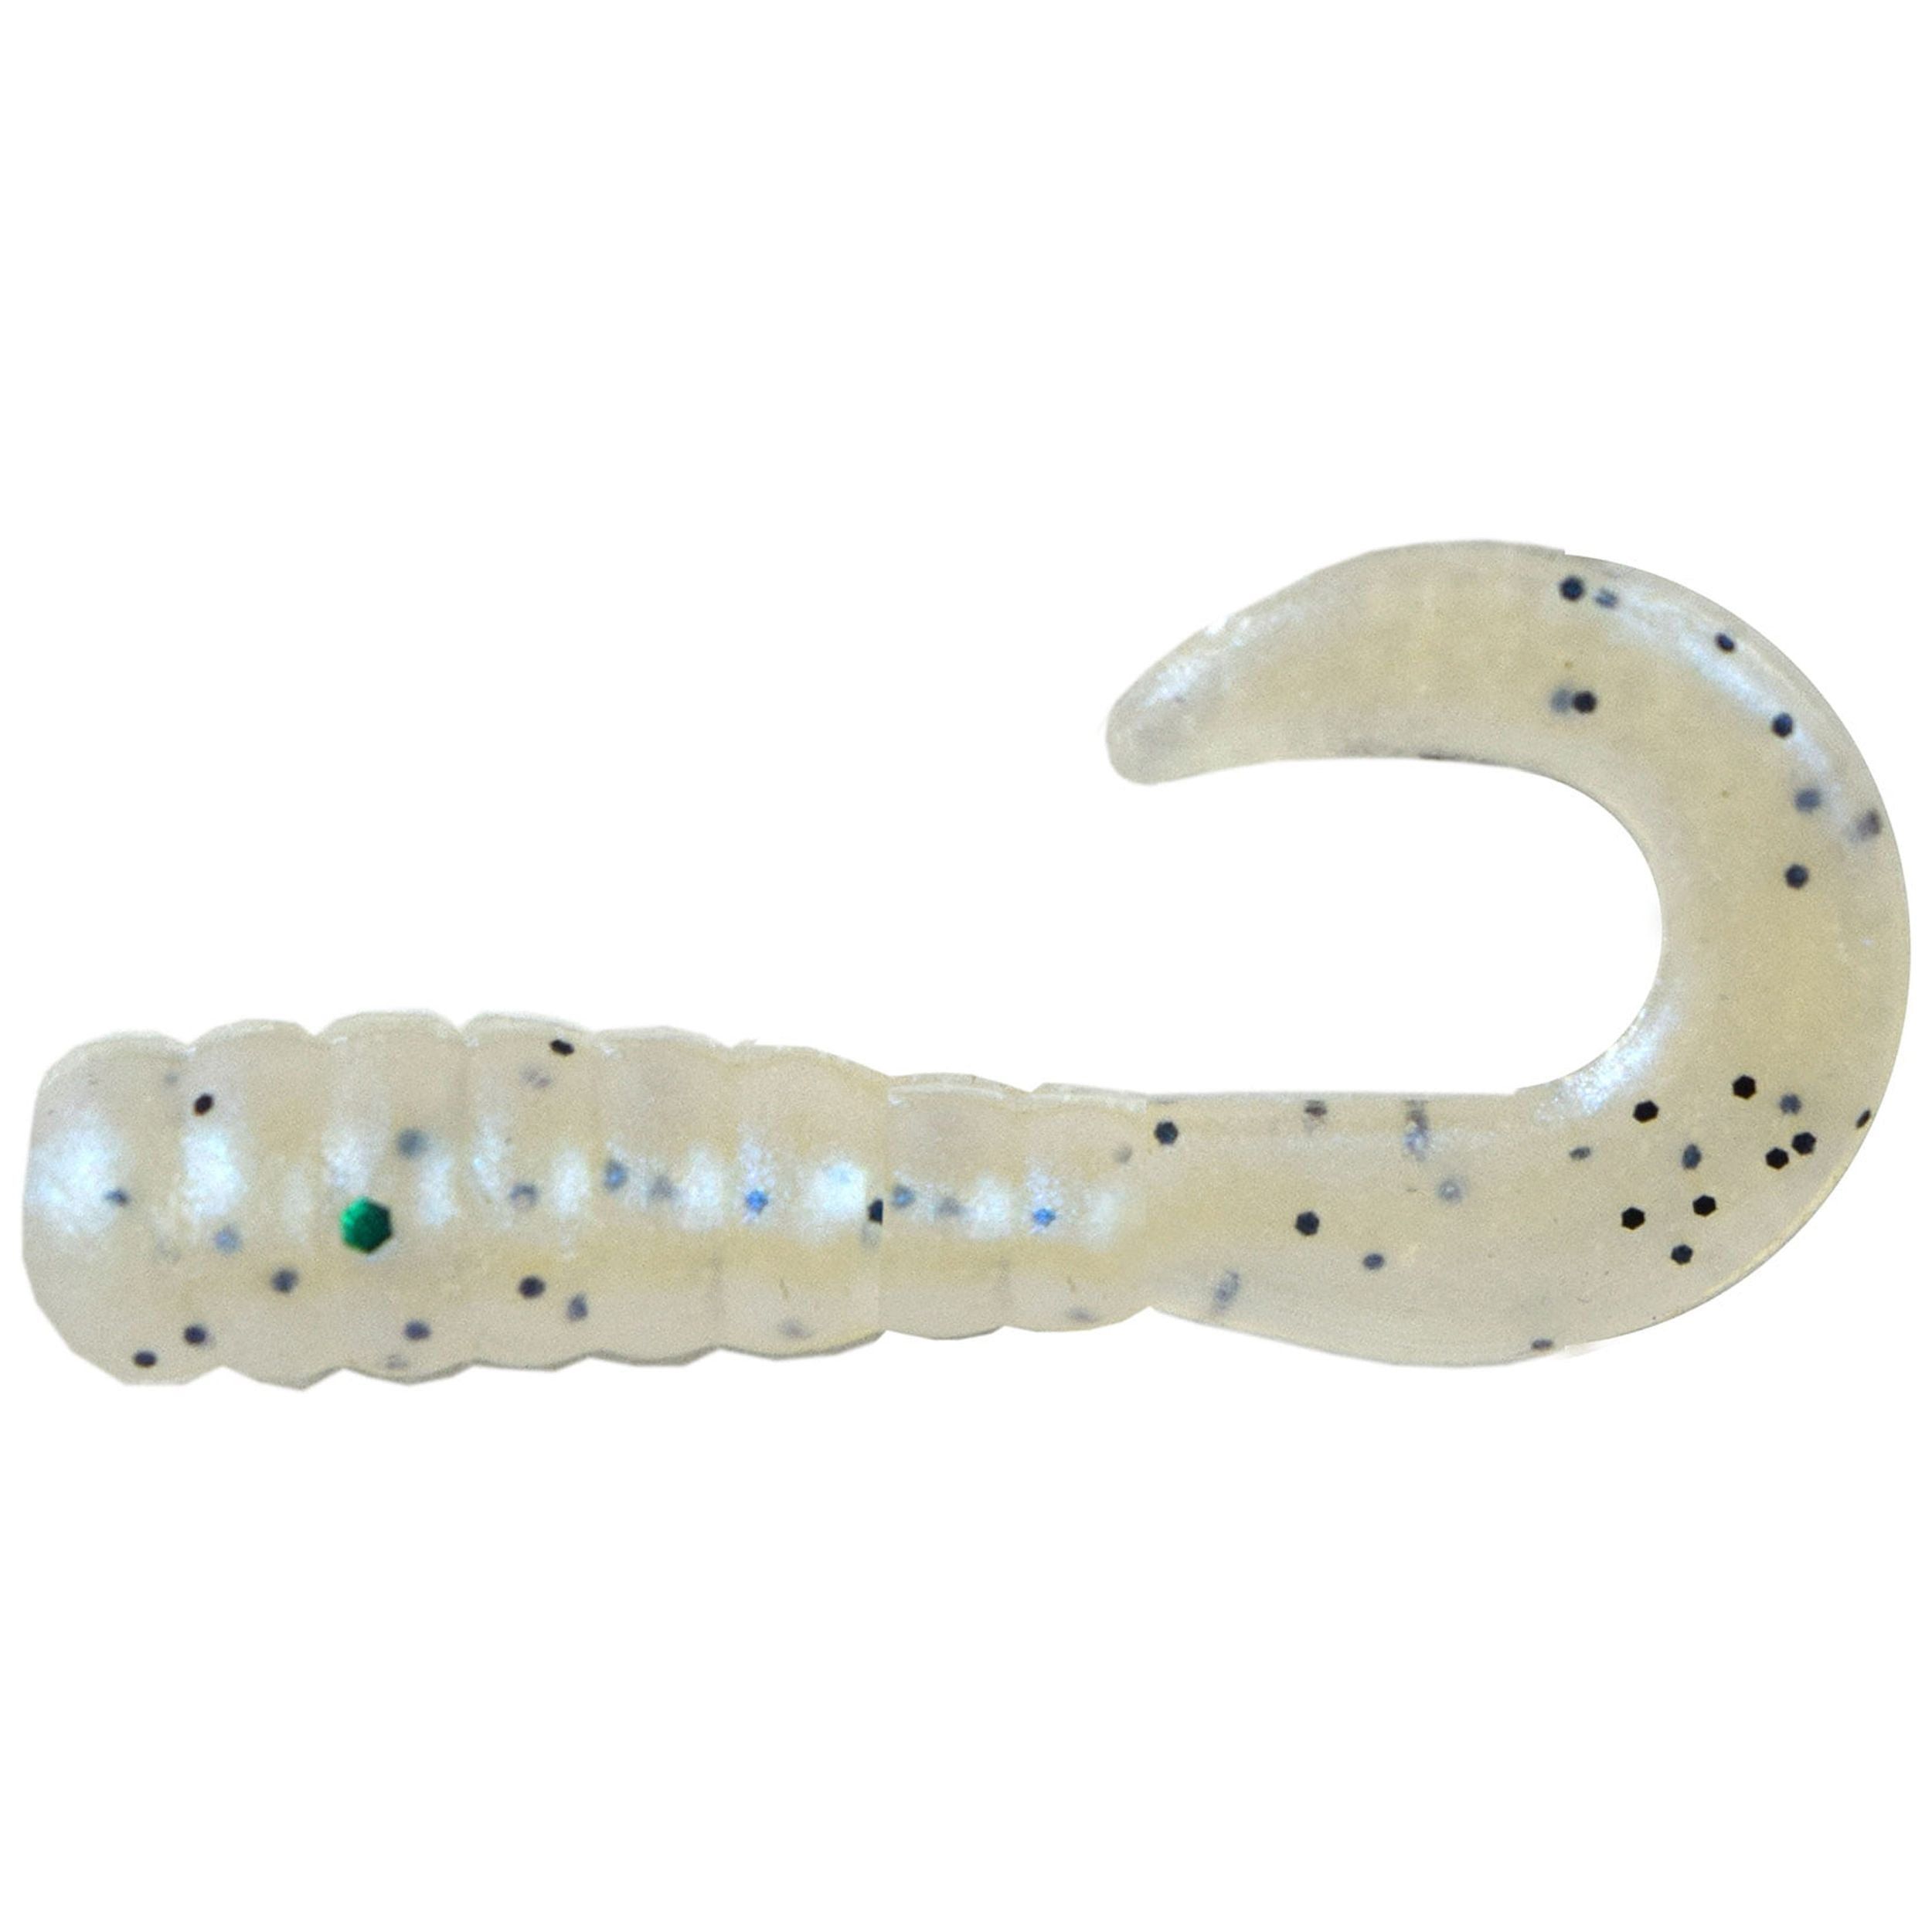 Tackle HD 100-Pack Grub Fishing Lures, 2-Inch Skirted Grub with Curly Tail,  Bulk Fishing Grubs for Crappie, Bass, Walleye, or Trout Bait, Freshwater or  Saltwater Swimbait, Monkey Milk 